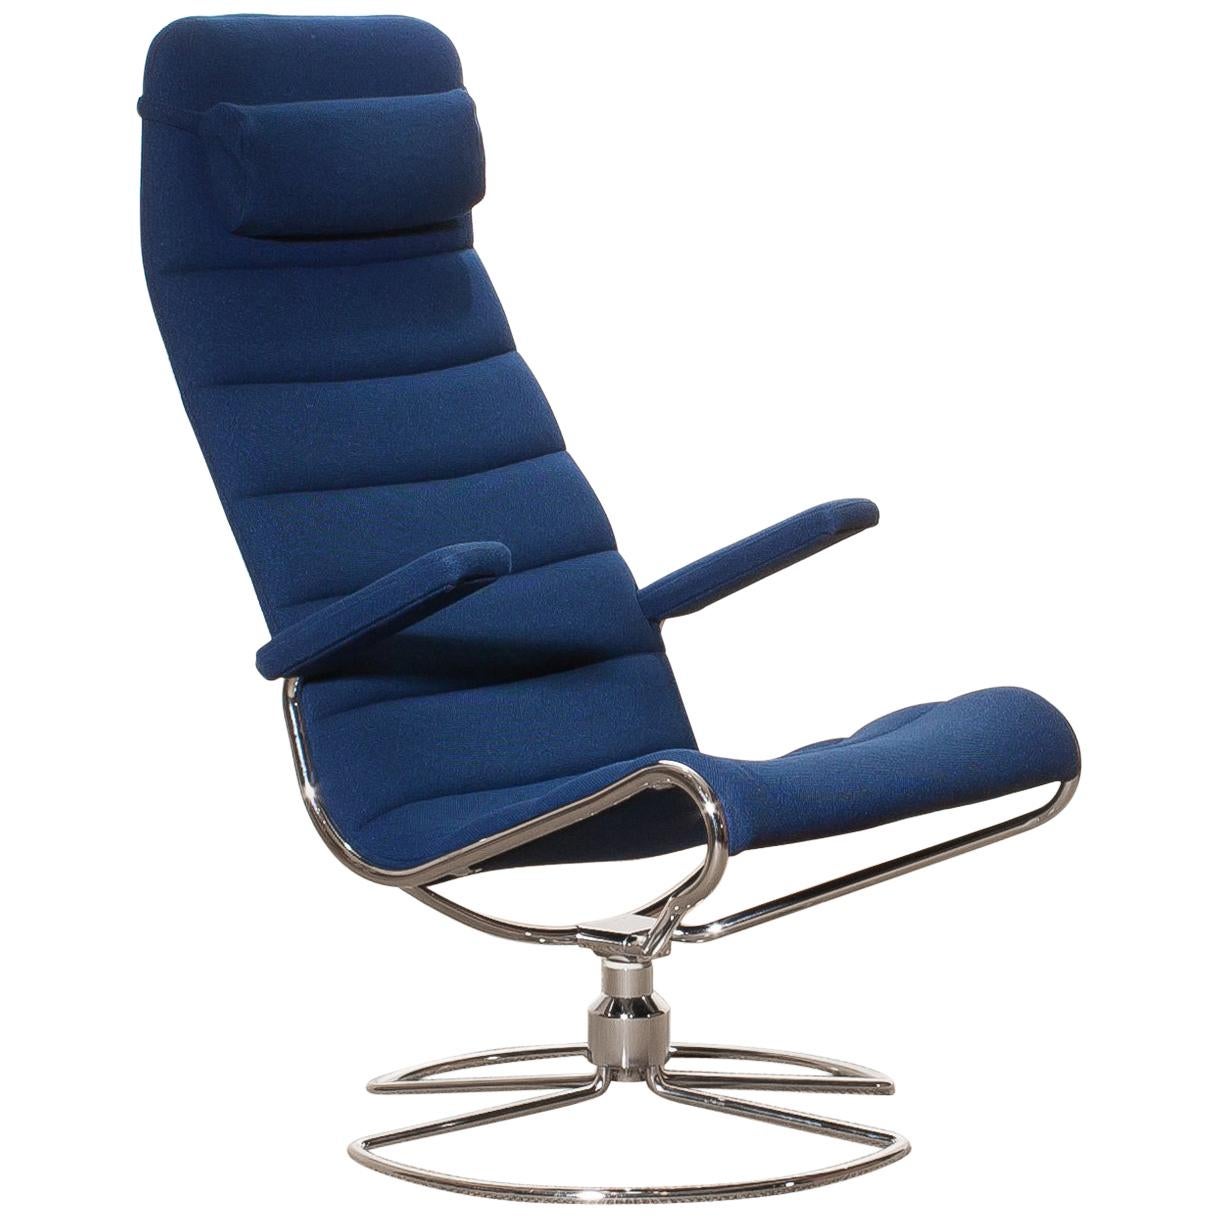 1980s, Chrome with Royal Blue Fabric 'Minister' Swivel Chair by Bruno Mathsson